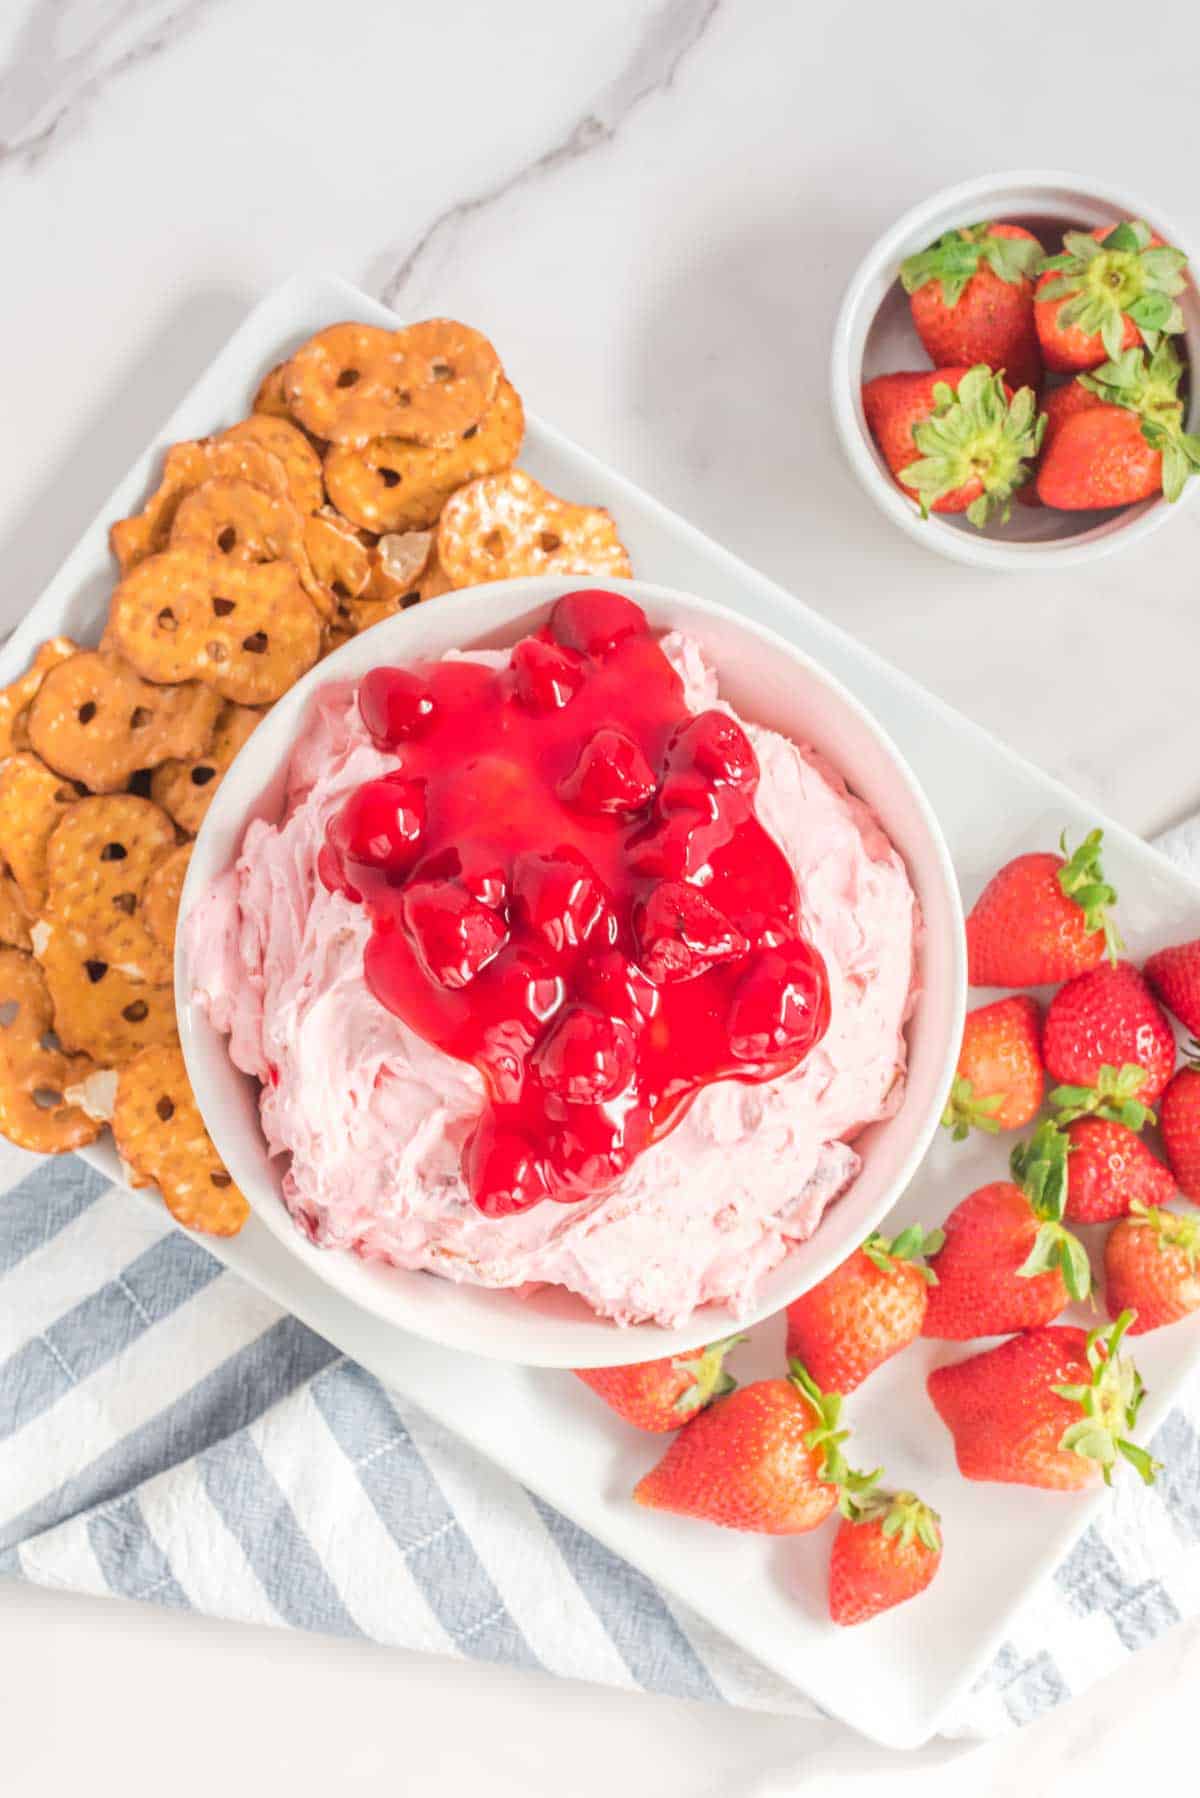 Overhead view of strawberry pretzel dip, pretzel chips, and strawberries on a platter.